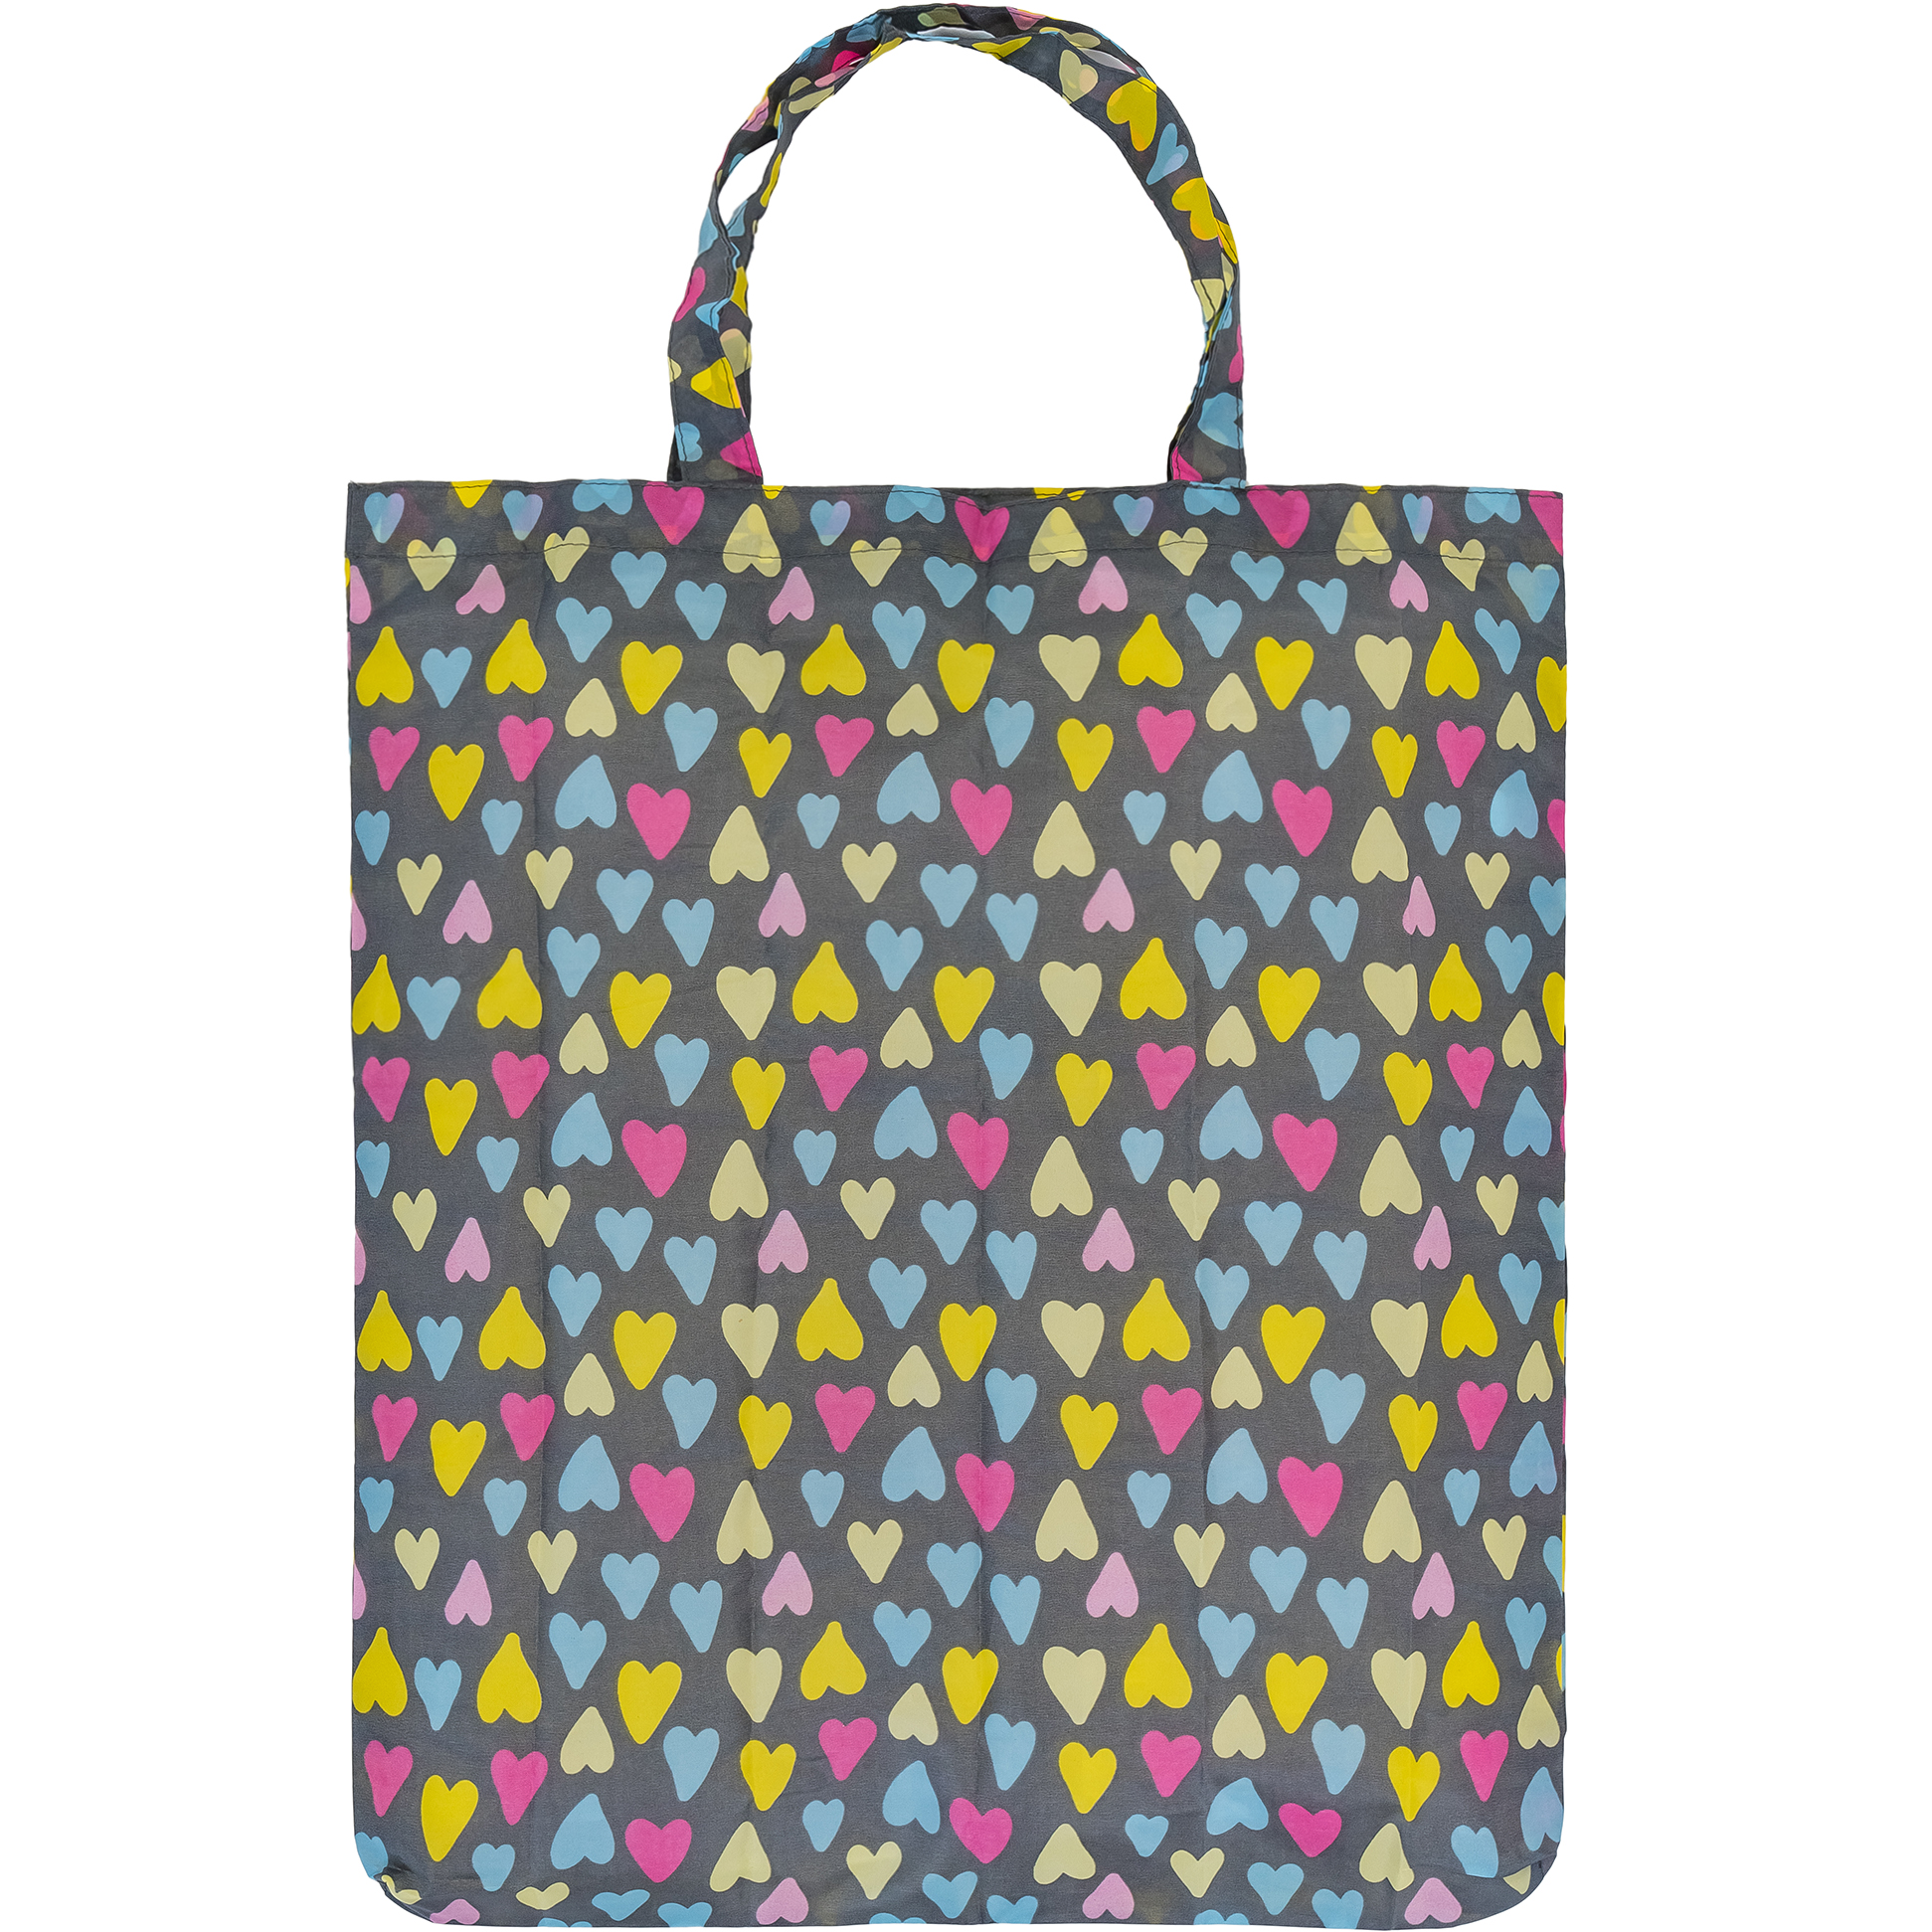 Reusable Shopping Bags | Bags For Life